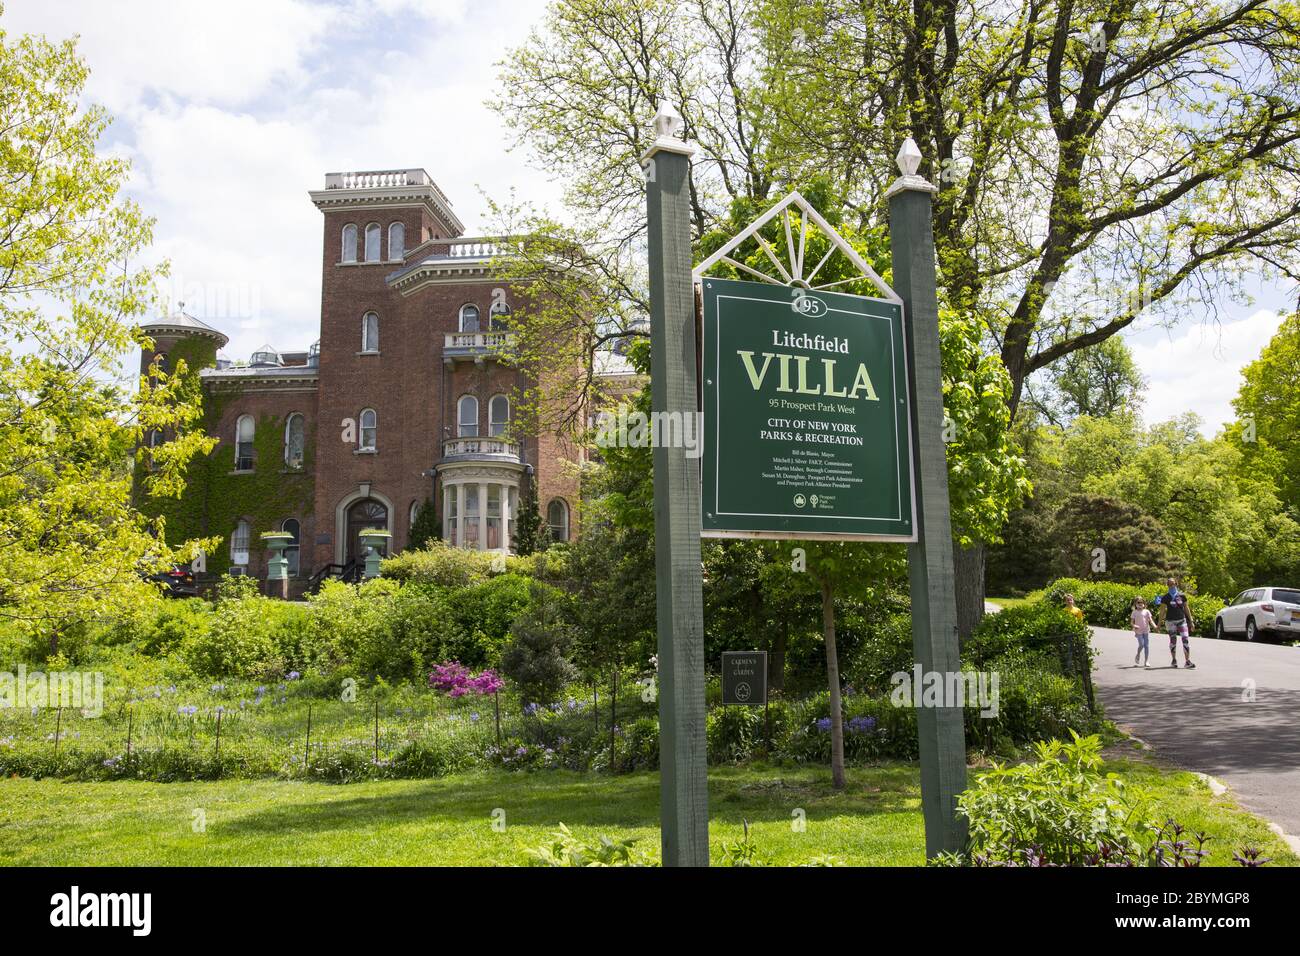 Prospect park alliance 95 prospect park west brooklyn ny 11215 Litchfield Villa Or Grace Hill Is An Italianate Mansion Built In 1854 1857 On A Large Private Estate Now Located In Prospect Park Brooklyn New Y Stock Photo Alamy